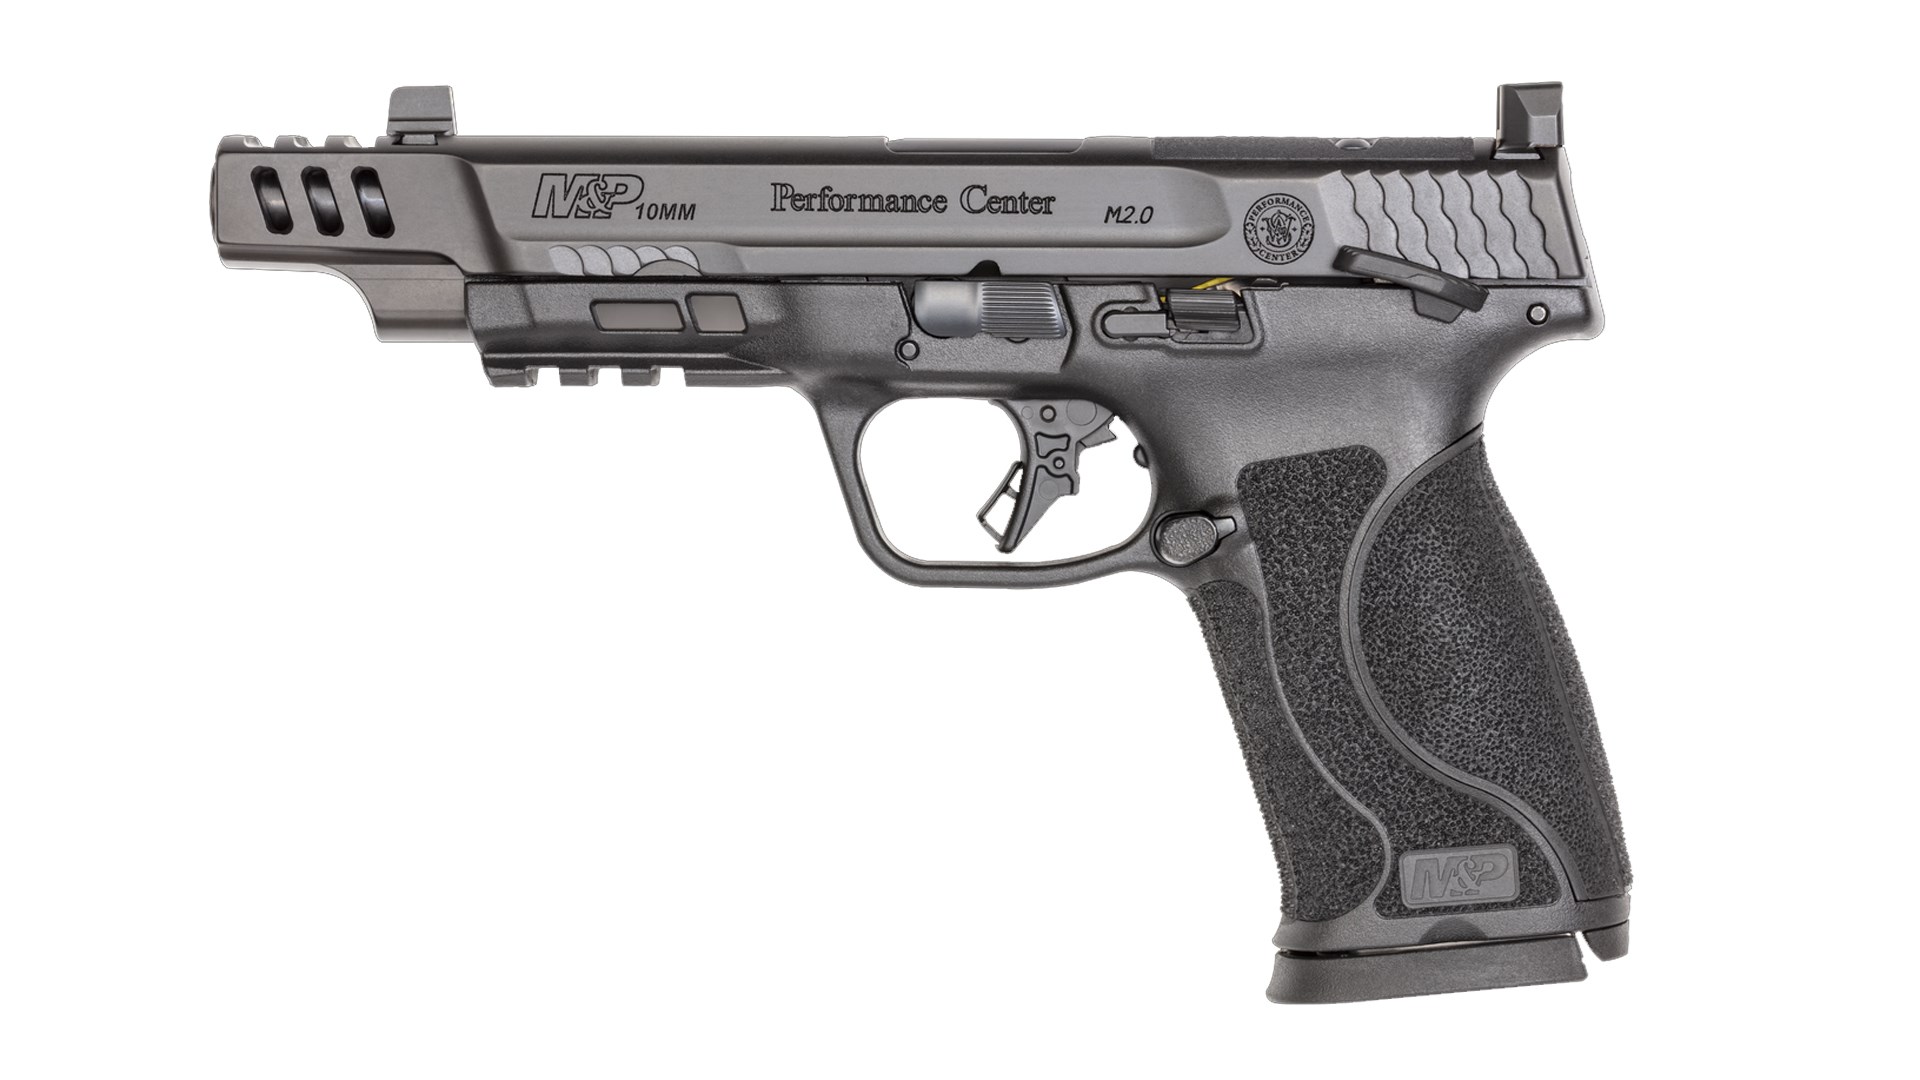 Left side of the Smith & Wesson M&P 10 mm Performance Center Edition shown on a white background.